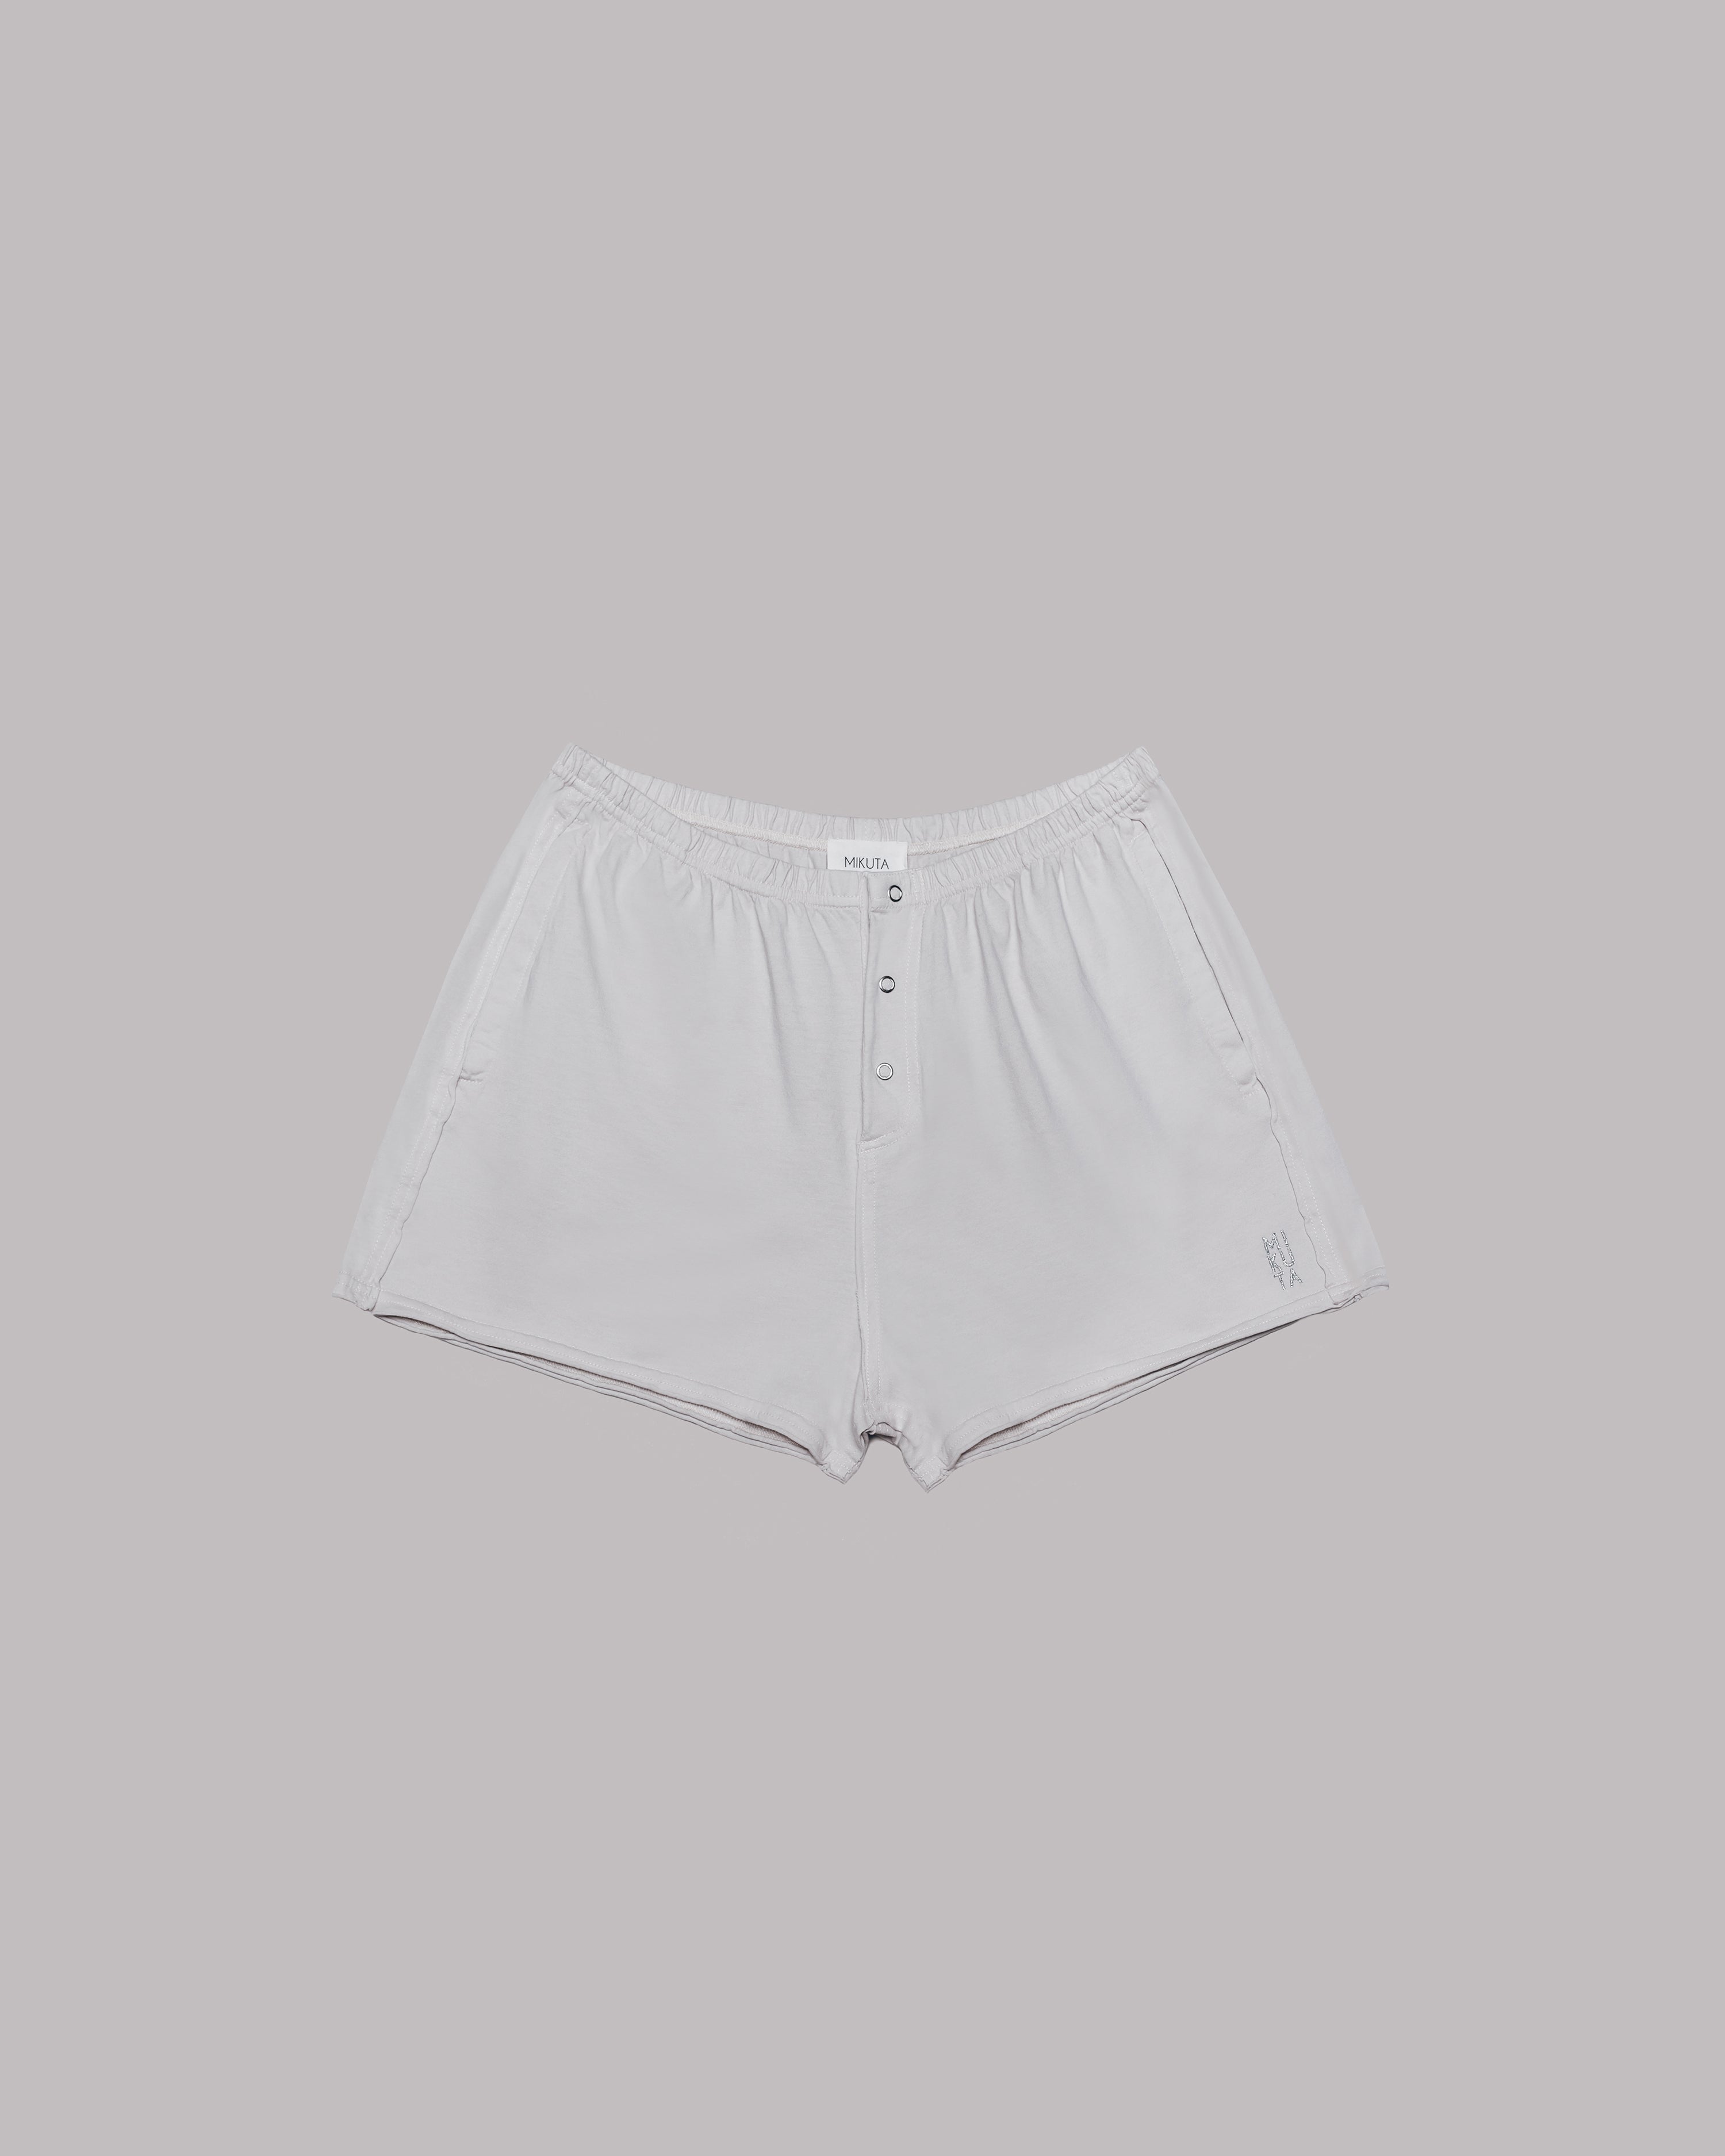 The Light Dreamers Shorts